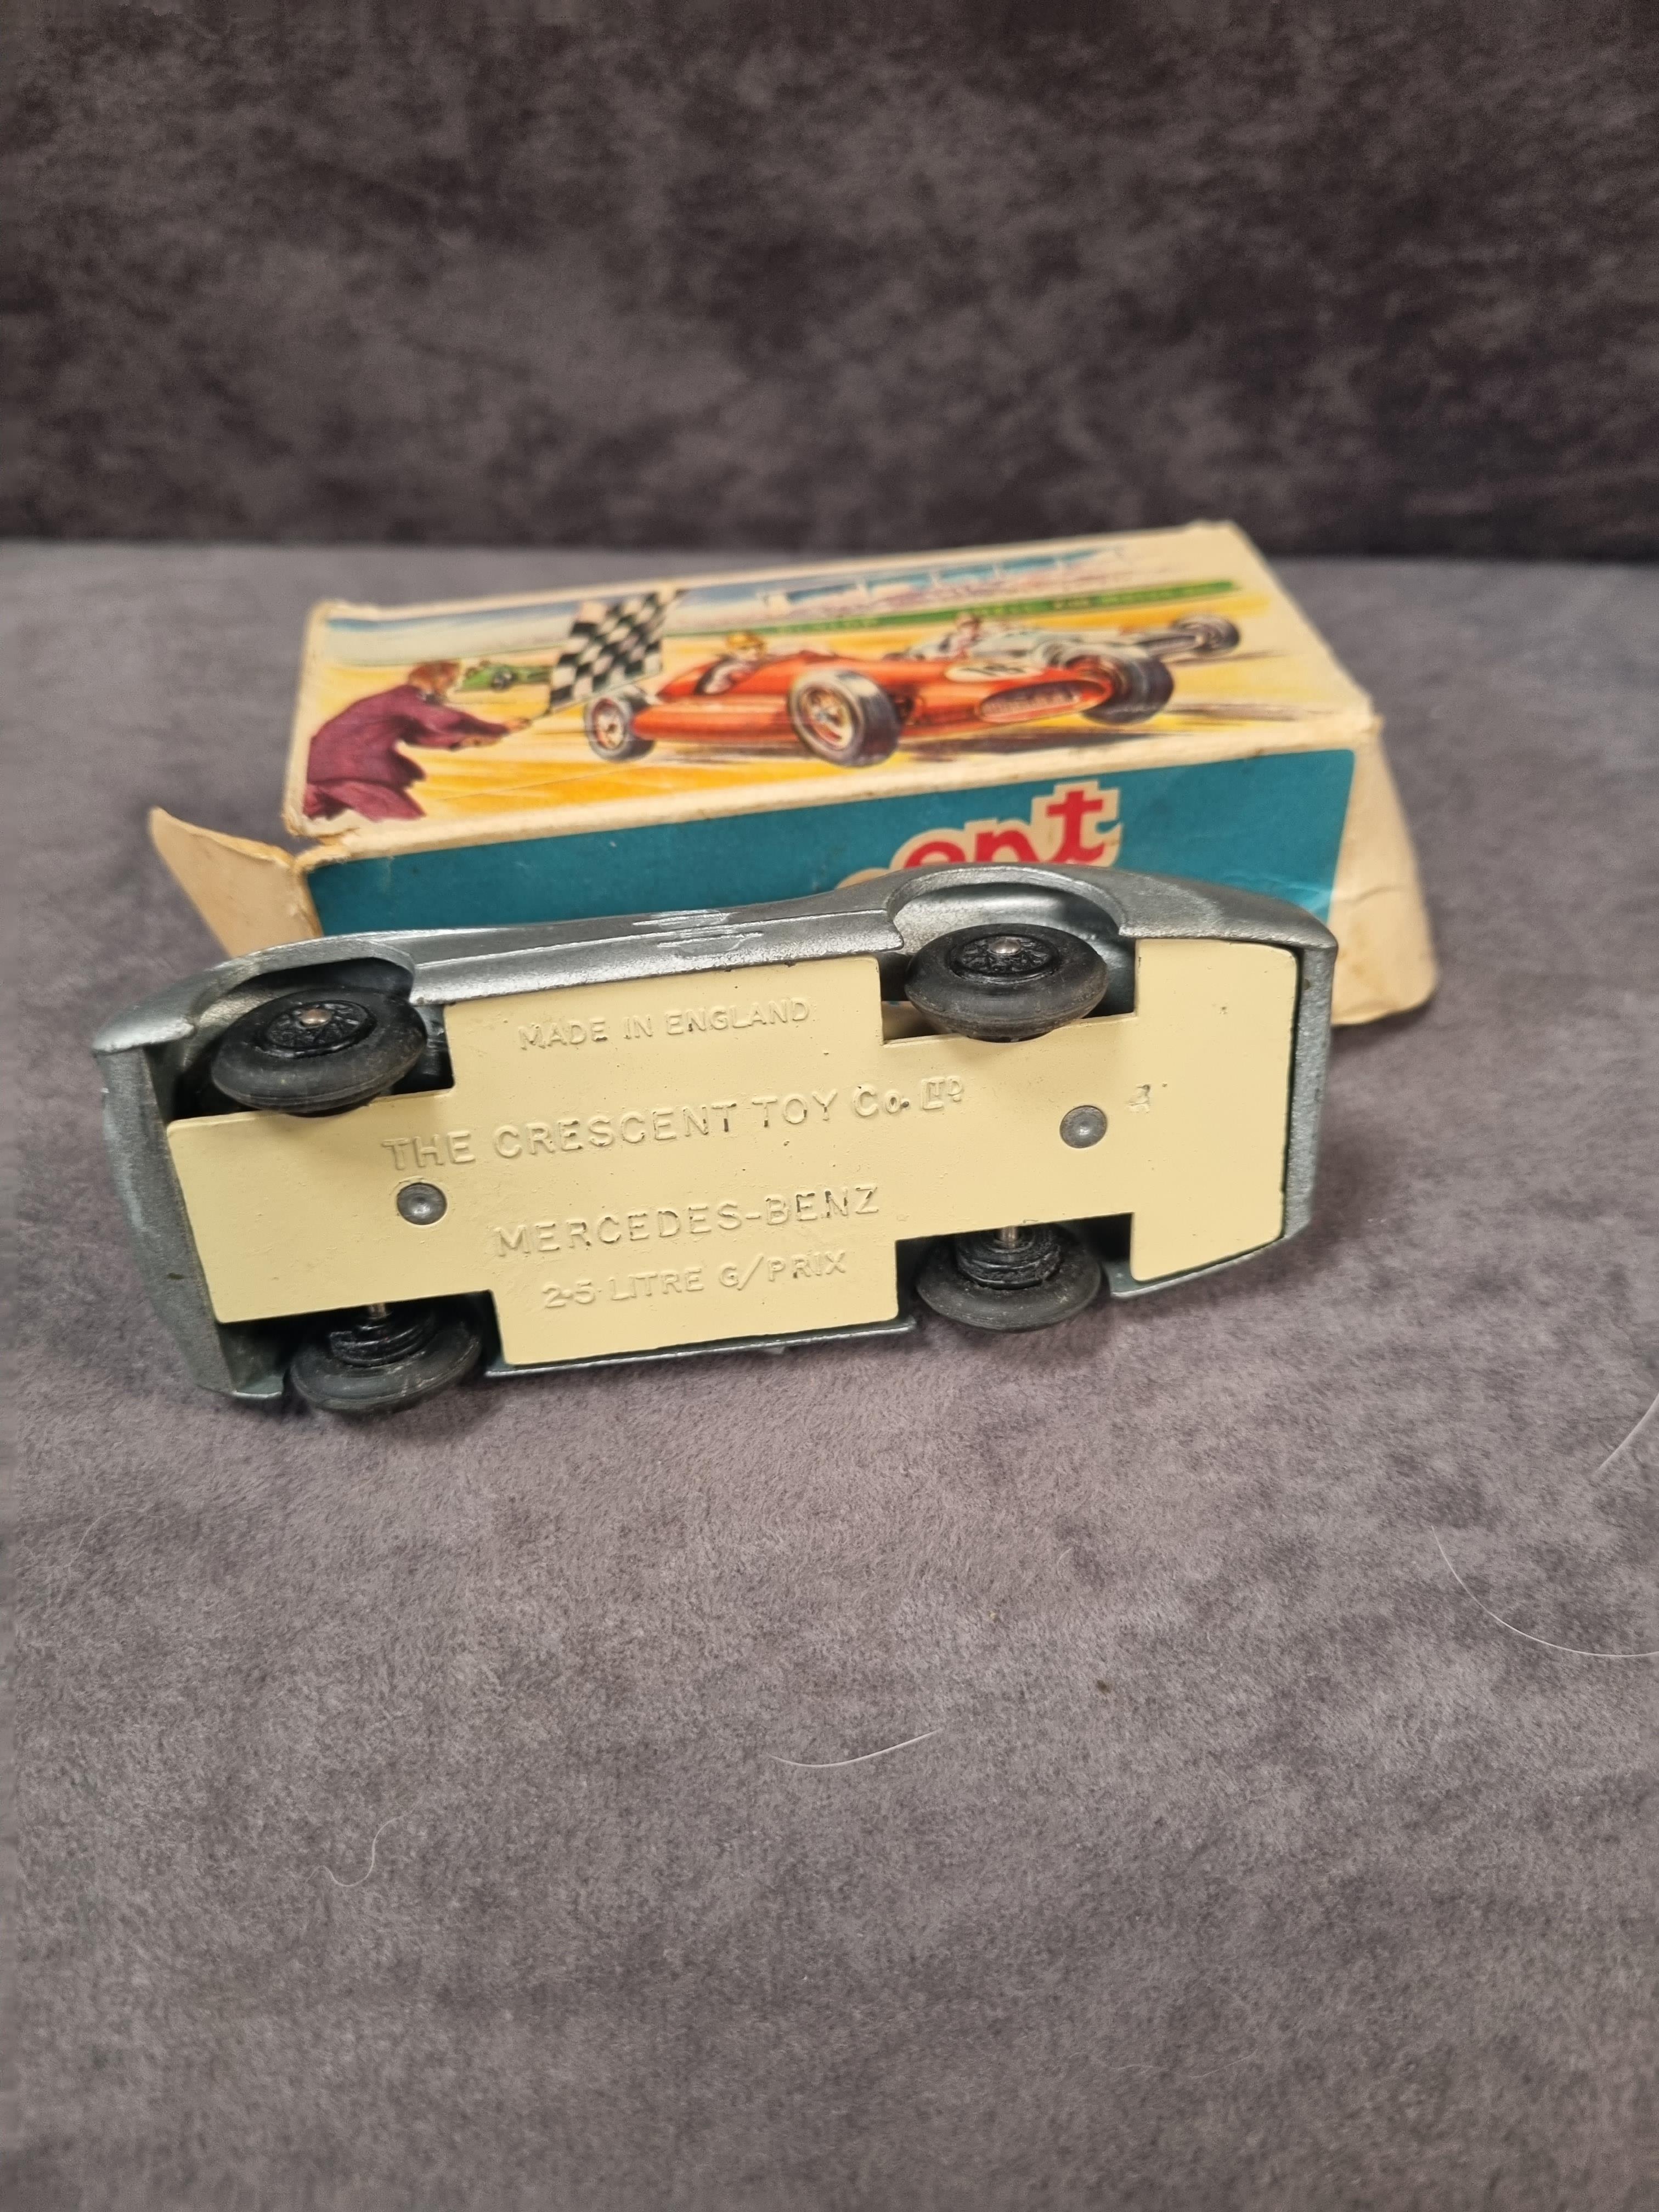 Crescent Toys diecast #1284 Mercedes Benz 2.5 Grand Prix Racing car in box (missing one end flap and - Image 4 of 4